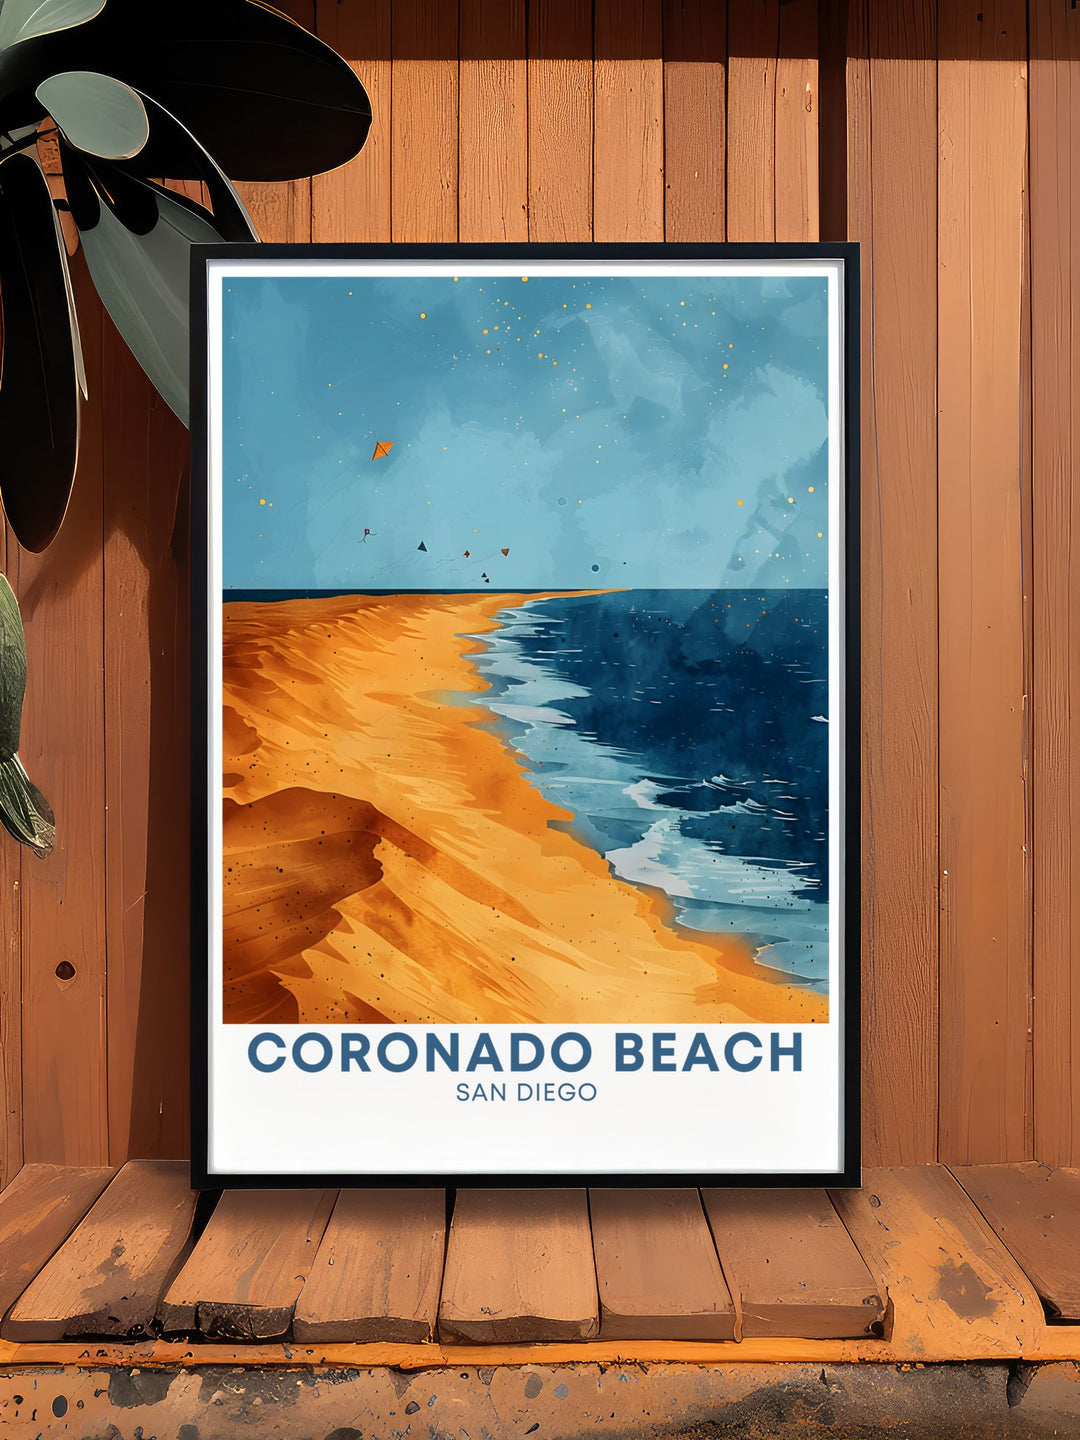 Perfect for ski enthusiasts and nature lovers our Vail Ski Gift and Sand Dunes artwork offer a unique combination of Colorados natural beauty. These prints make wonderful gifts for any occasion.